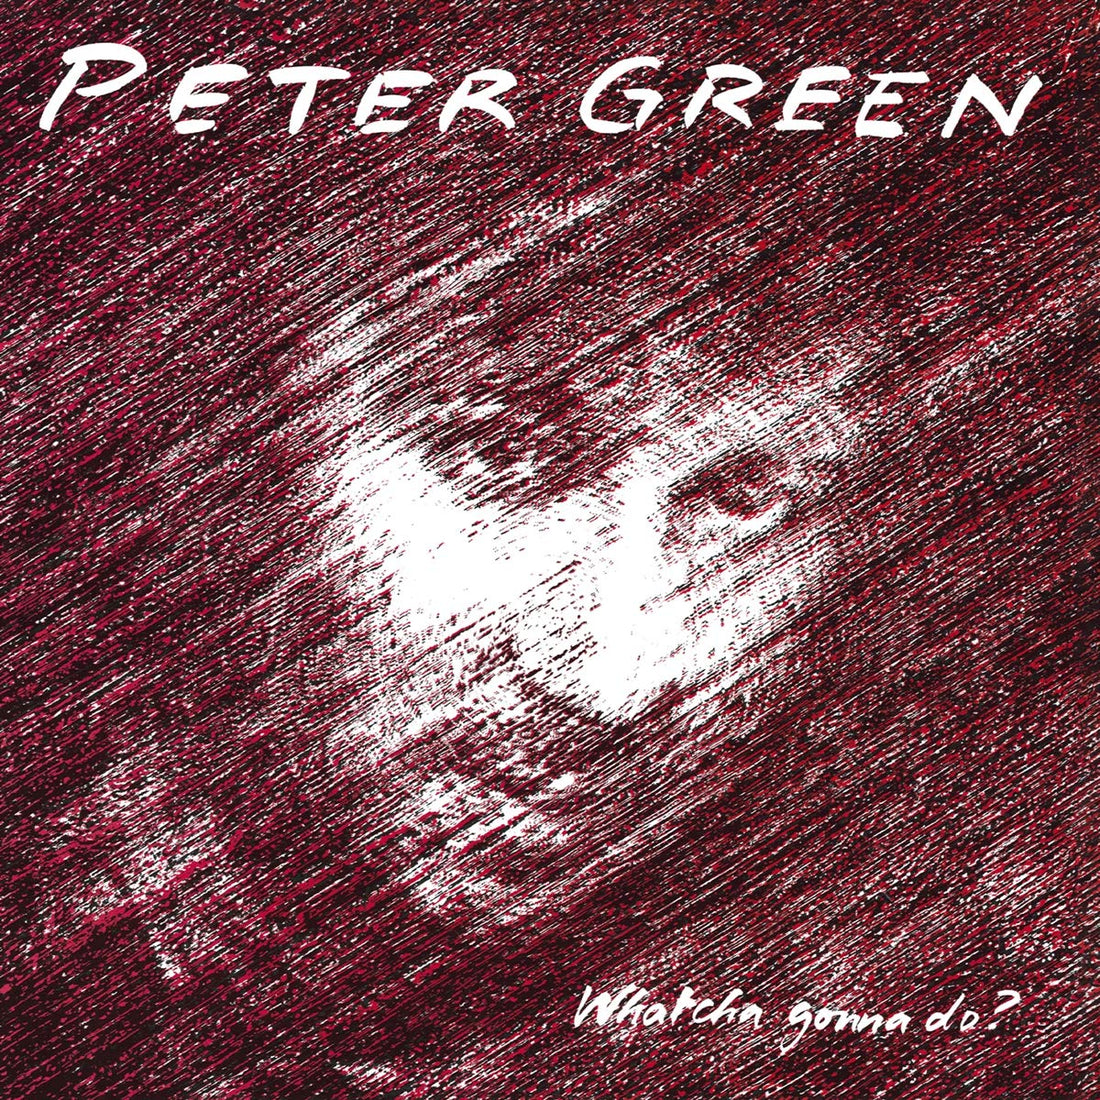 Peter Green- Whatcha Gonna Do